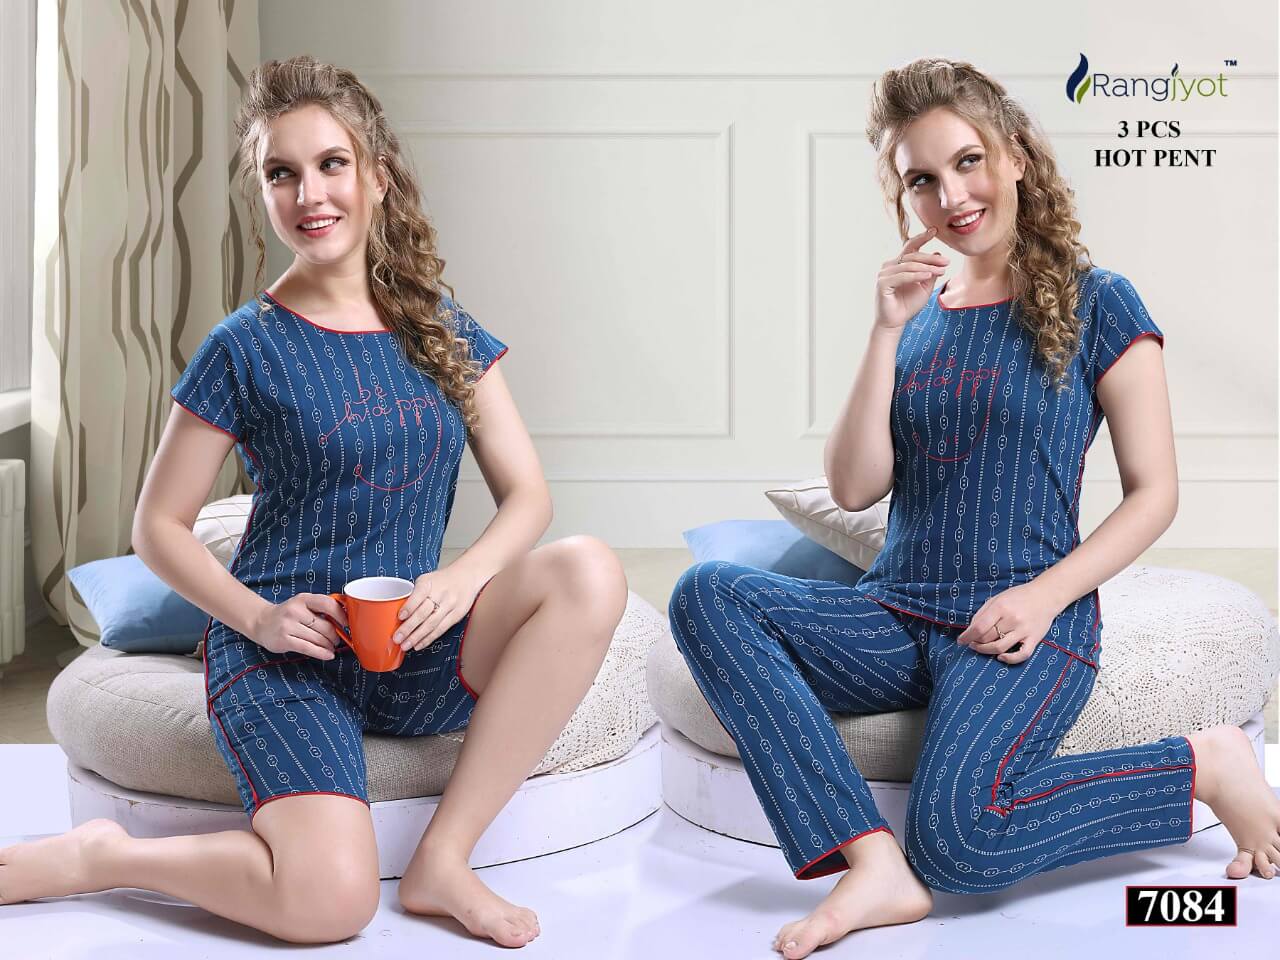 Rangjyot 3 Piece Night Suit Catalog in Wholesale Price, Buy Rangjyot Top Pant and Shorts Night Suit Catalog in Wholesale From Aarvee Creation Online